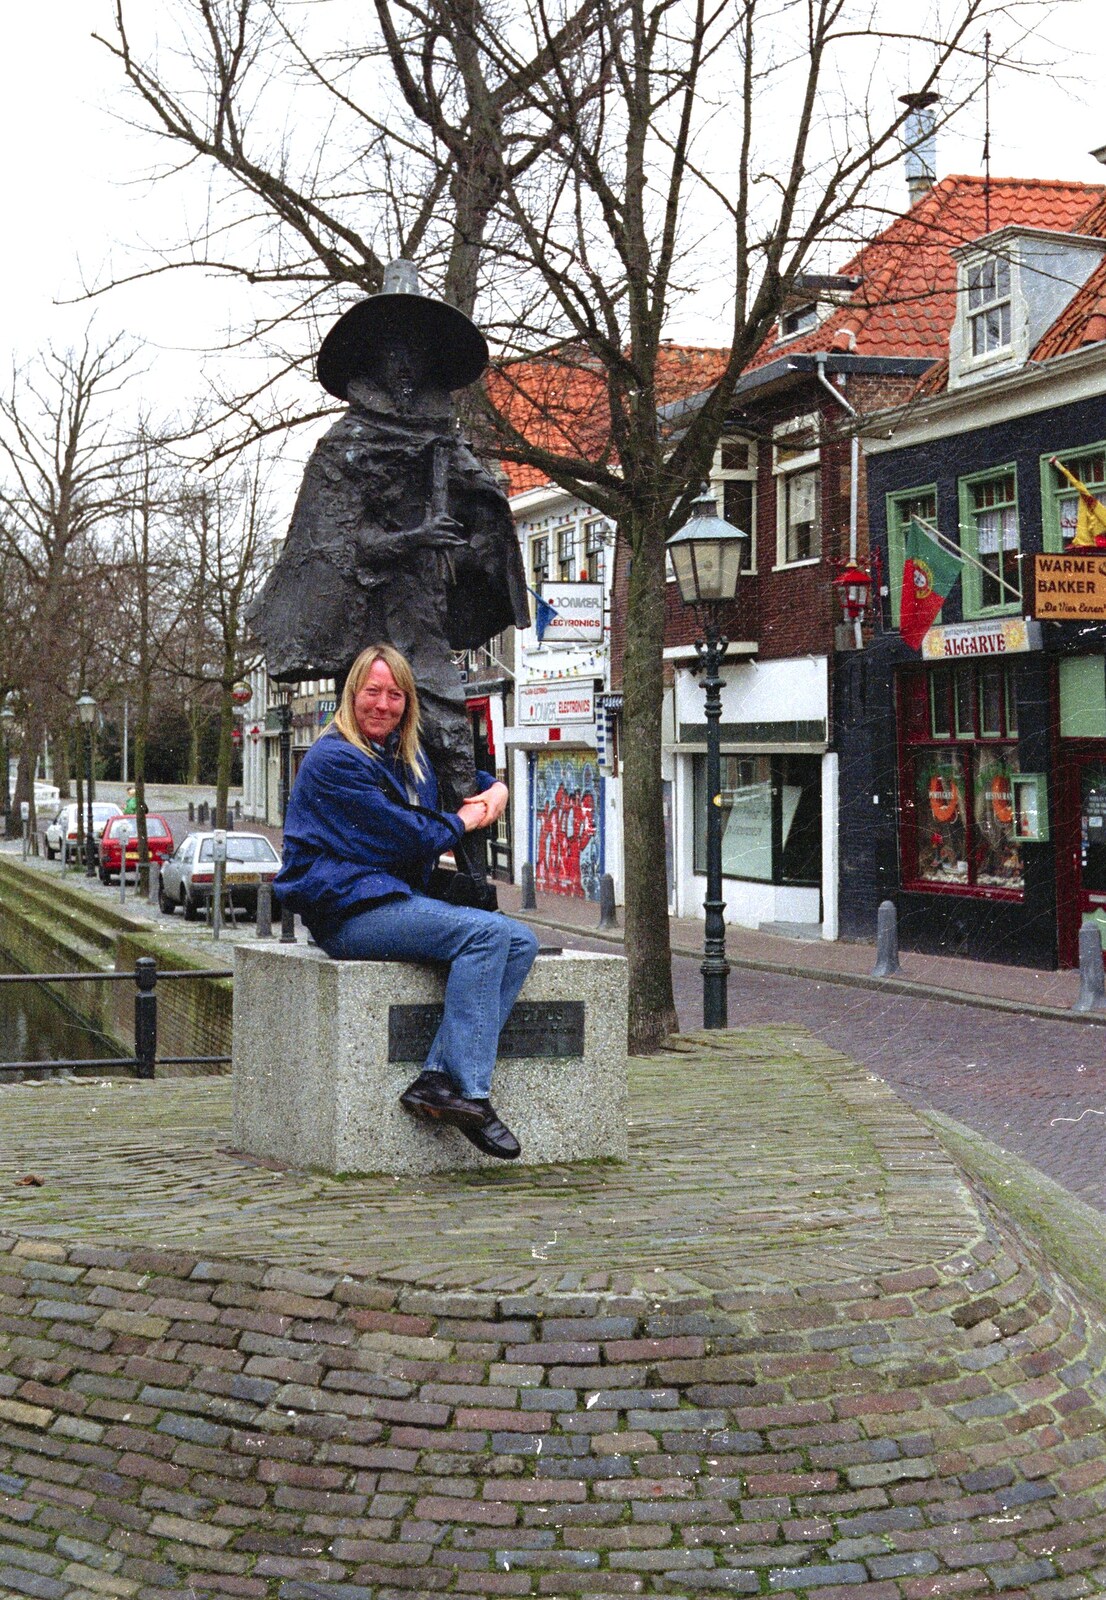 Out and About in Amsterdam, Hoorne, Vollendam and Edam, The Netherlands - 26th March 1992: Sue hugs the legs of some statue